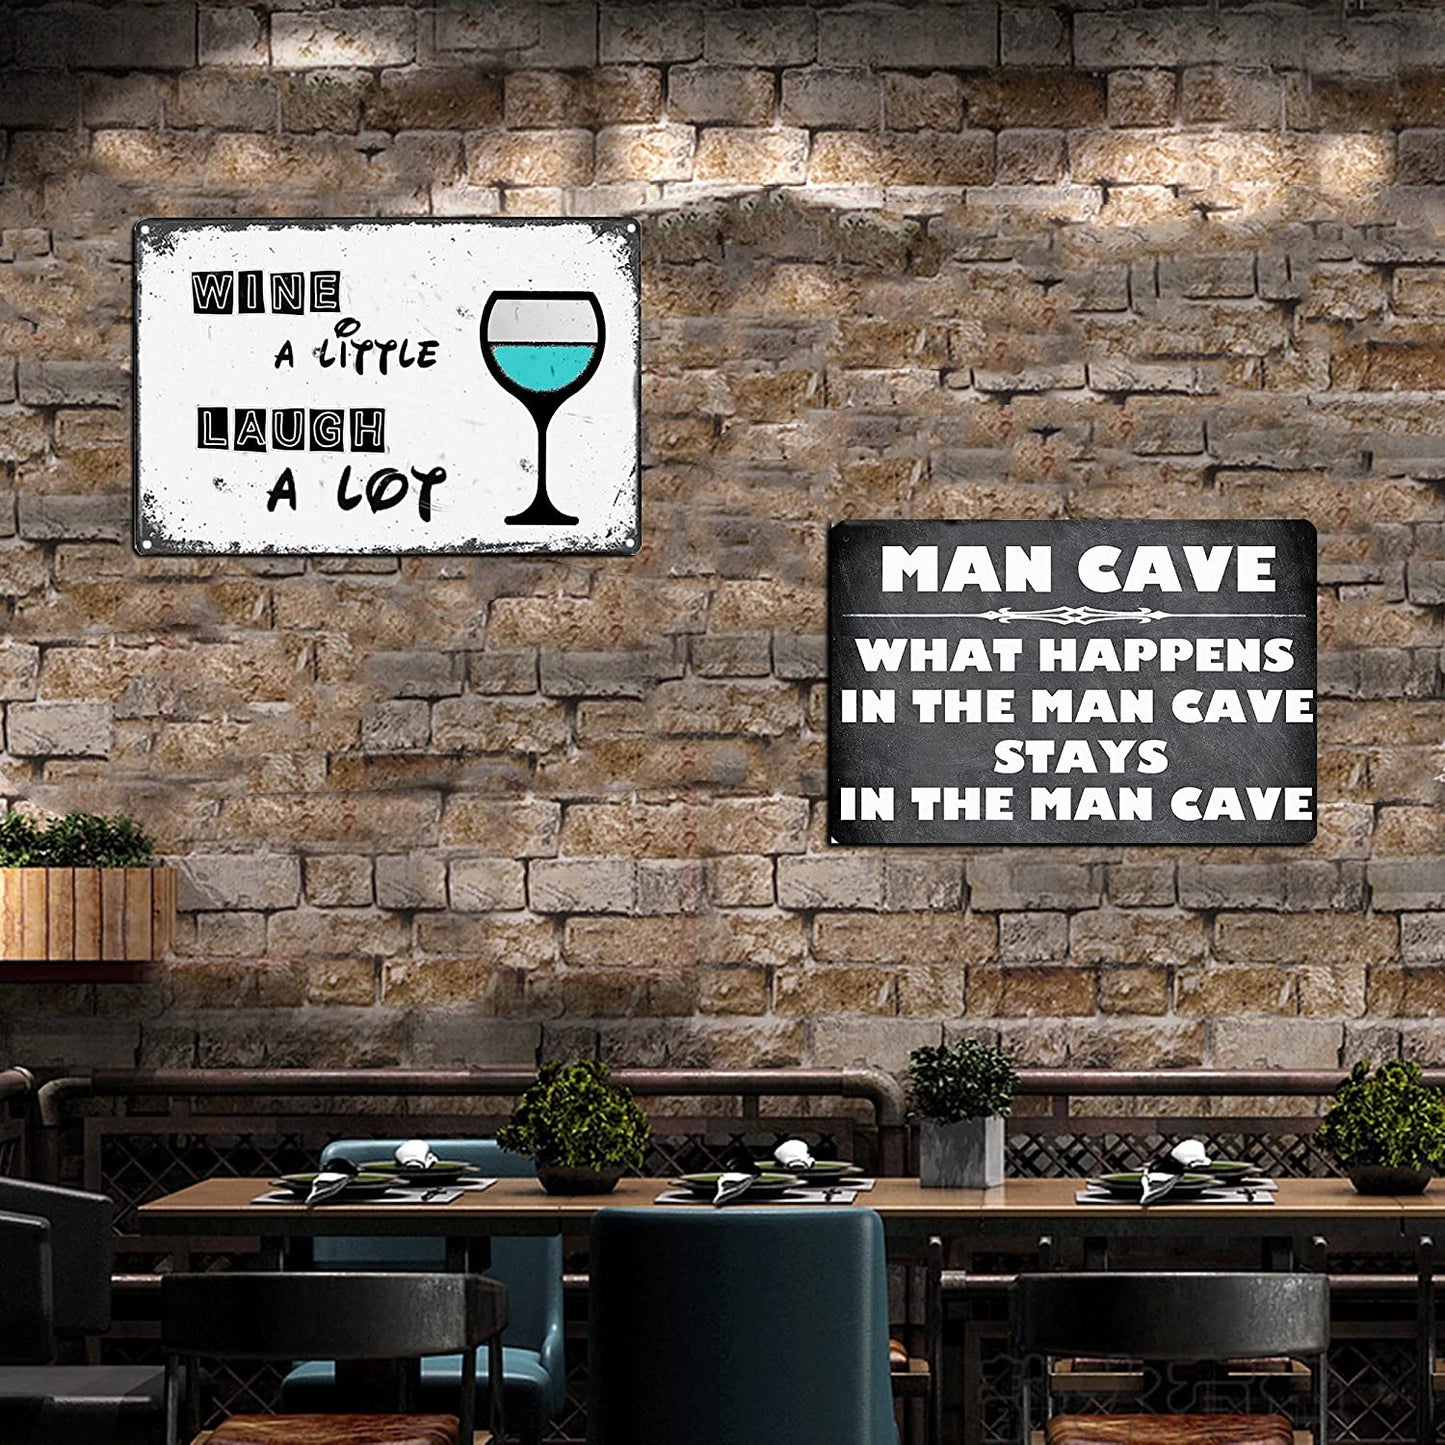 Man Cave What Happens in the Man Cave Stay in the Man Cave Metal Sign Vintage Retro Home House Man Cave Decor